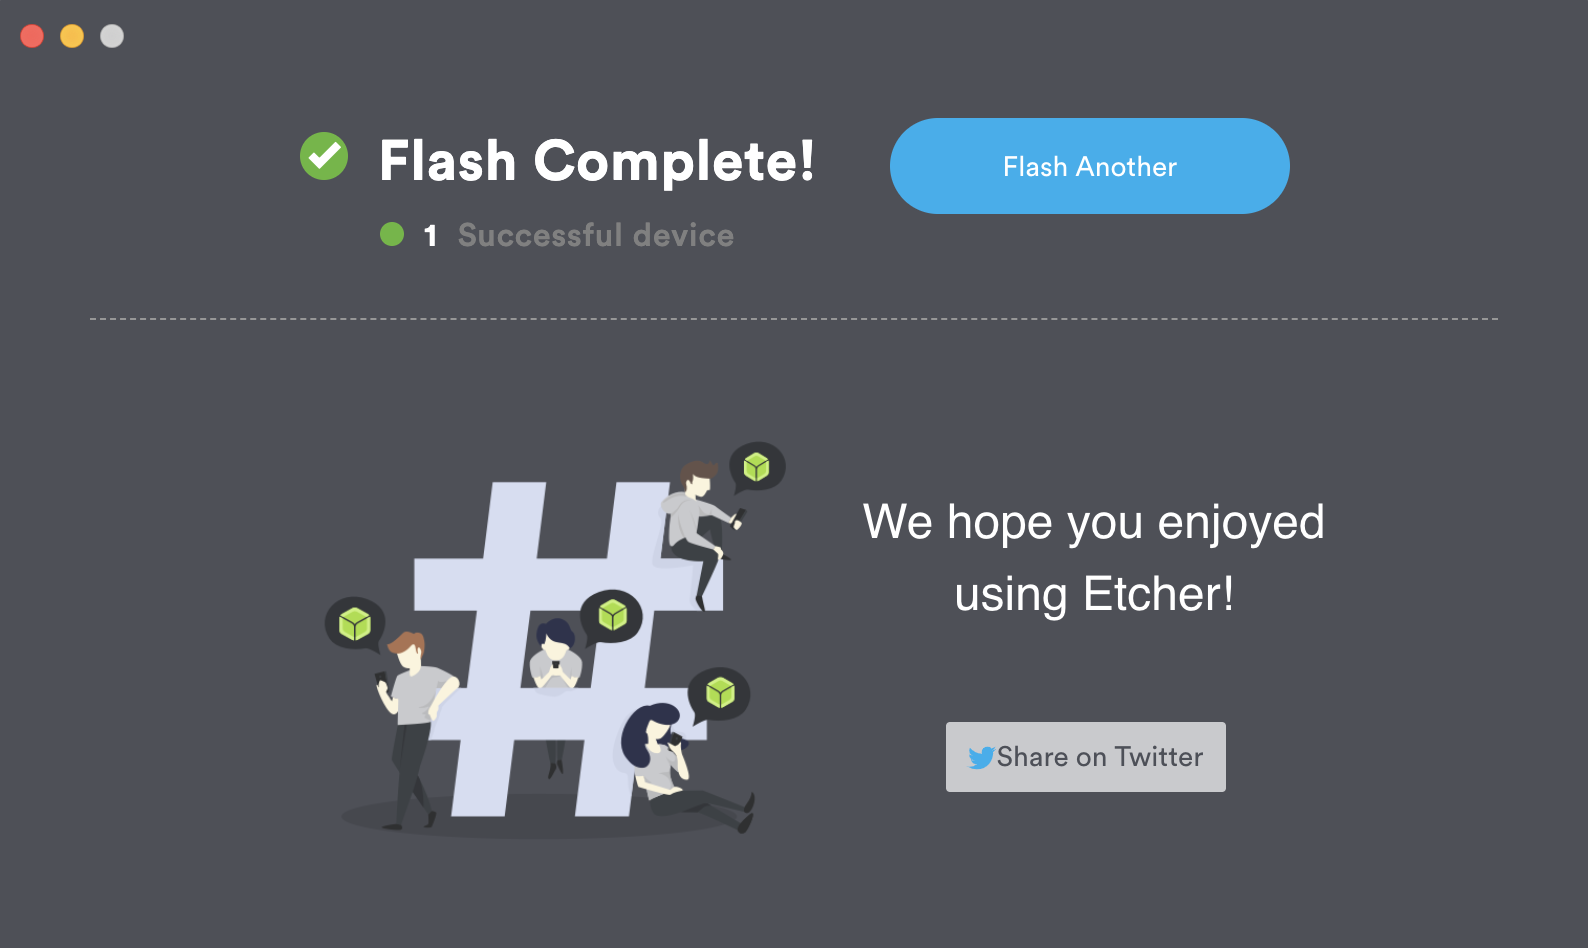 This image shows the "Flash Complete!" screen in BalenaEtcher.